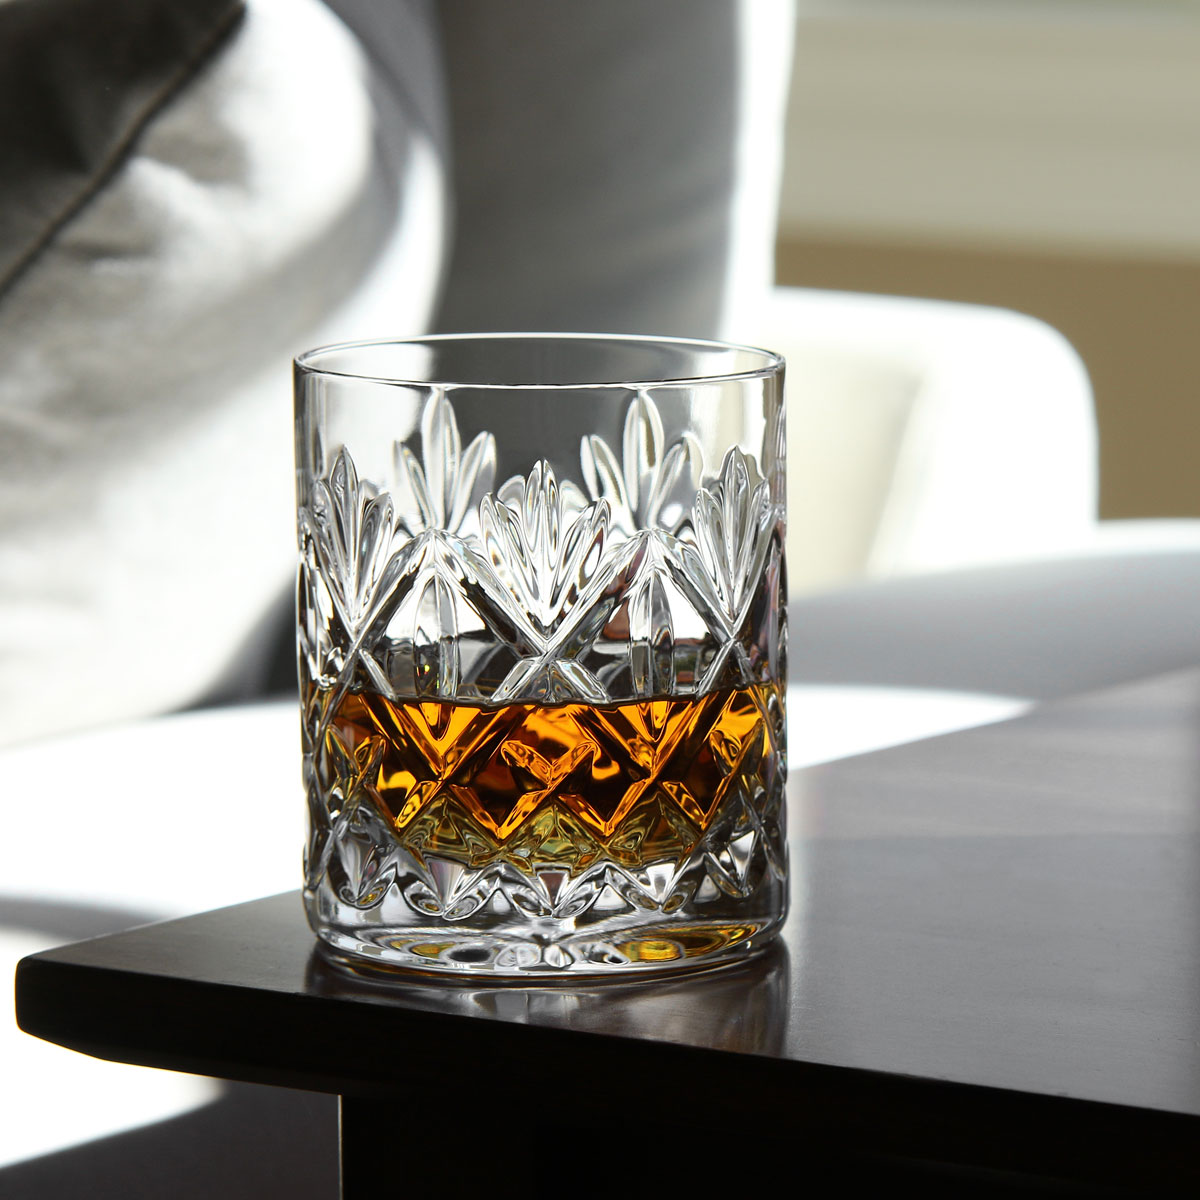 Waterford Crystal Huntley Whiskey Tumbler Glass, Set of 2, High End